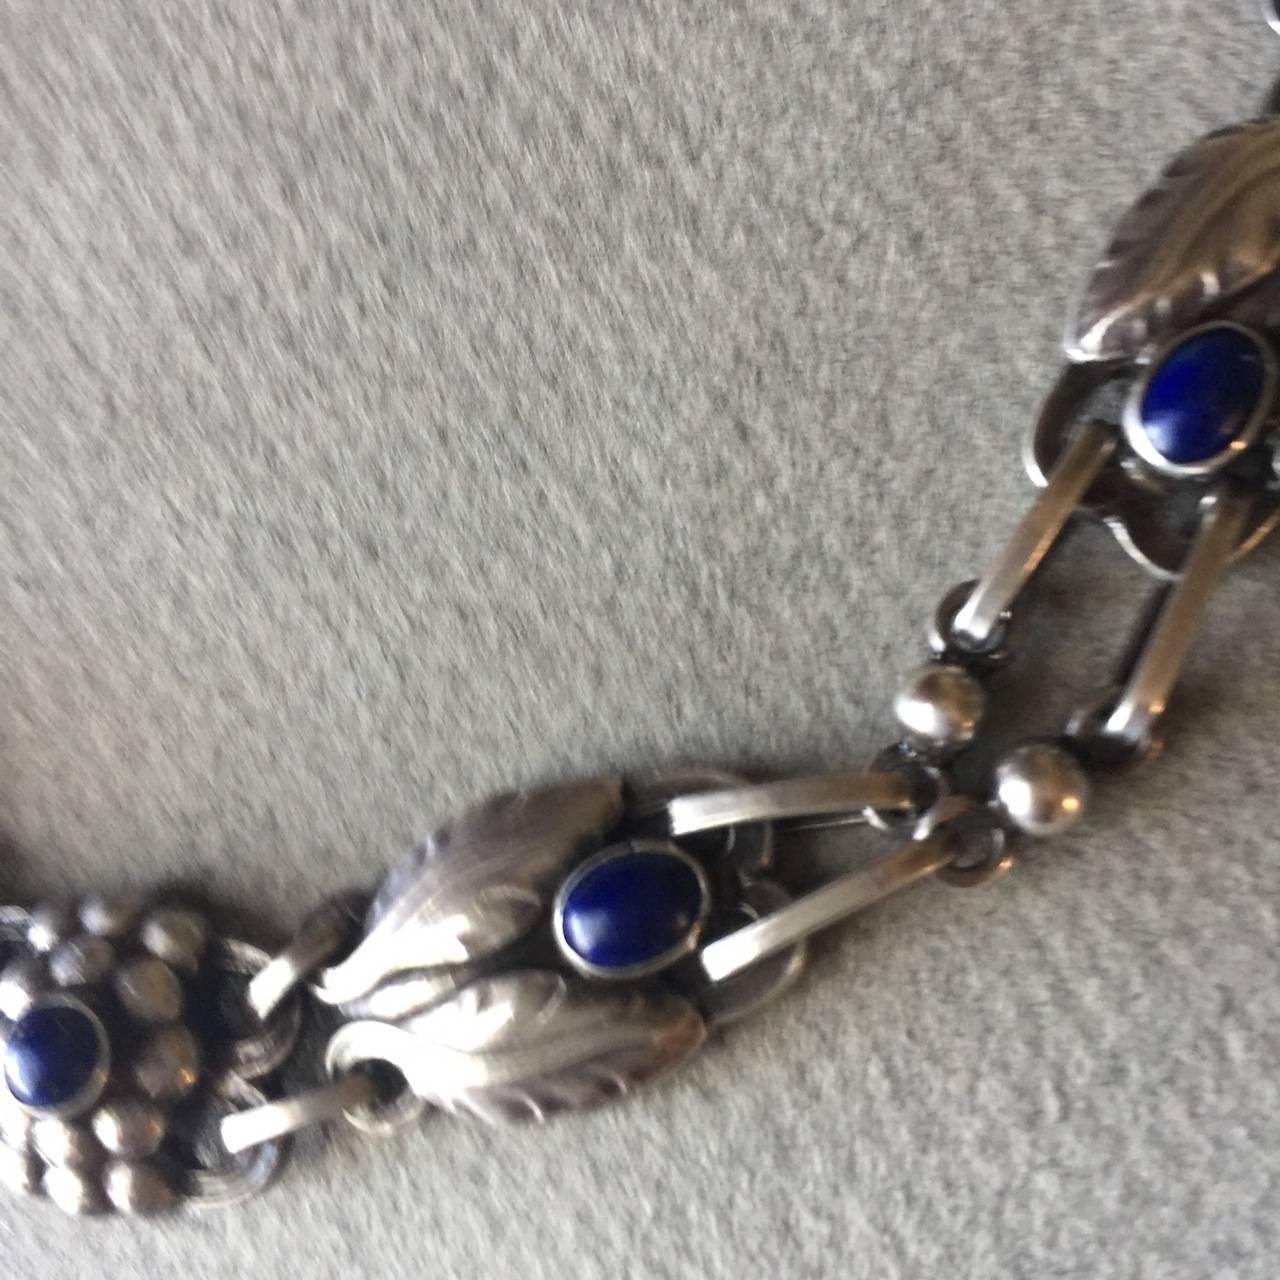 Georg Jensen Sterling Silver Necklace No. 1 with Lapis Lazuli.

Designed by Georg Jensen in 1904, this stunning piece has hallmarks from 1933-44.

This necklace is articulated beautifully so that it lays perfectly on the neck and breastbone. This